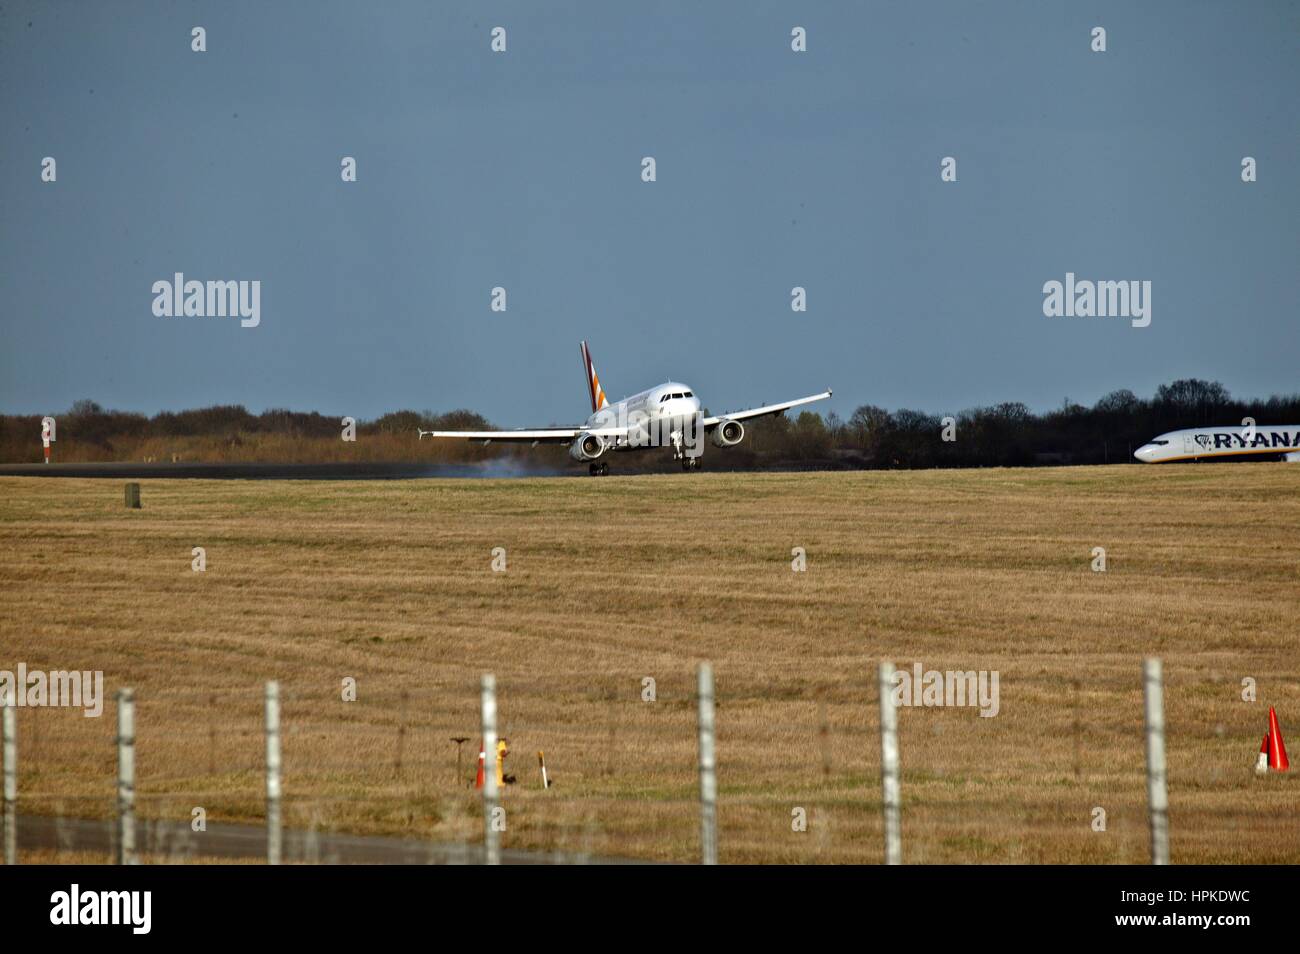 German Wings aircraft Landing in crosswinds at Stansted Airport during Storm Doris Stock Photo